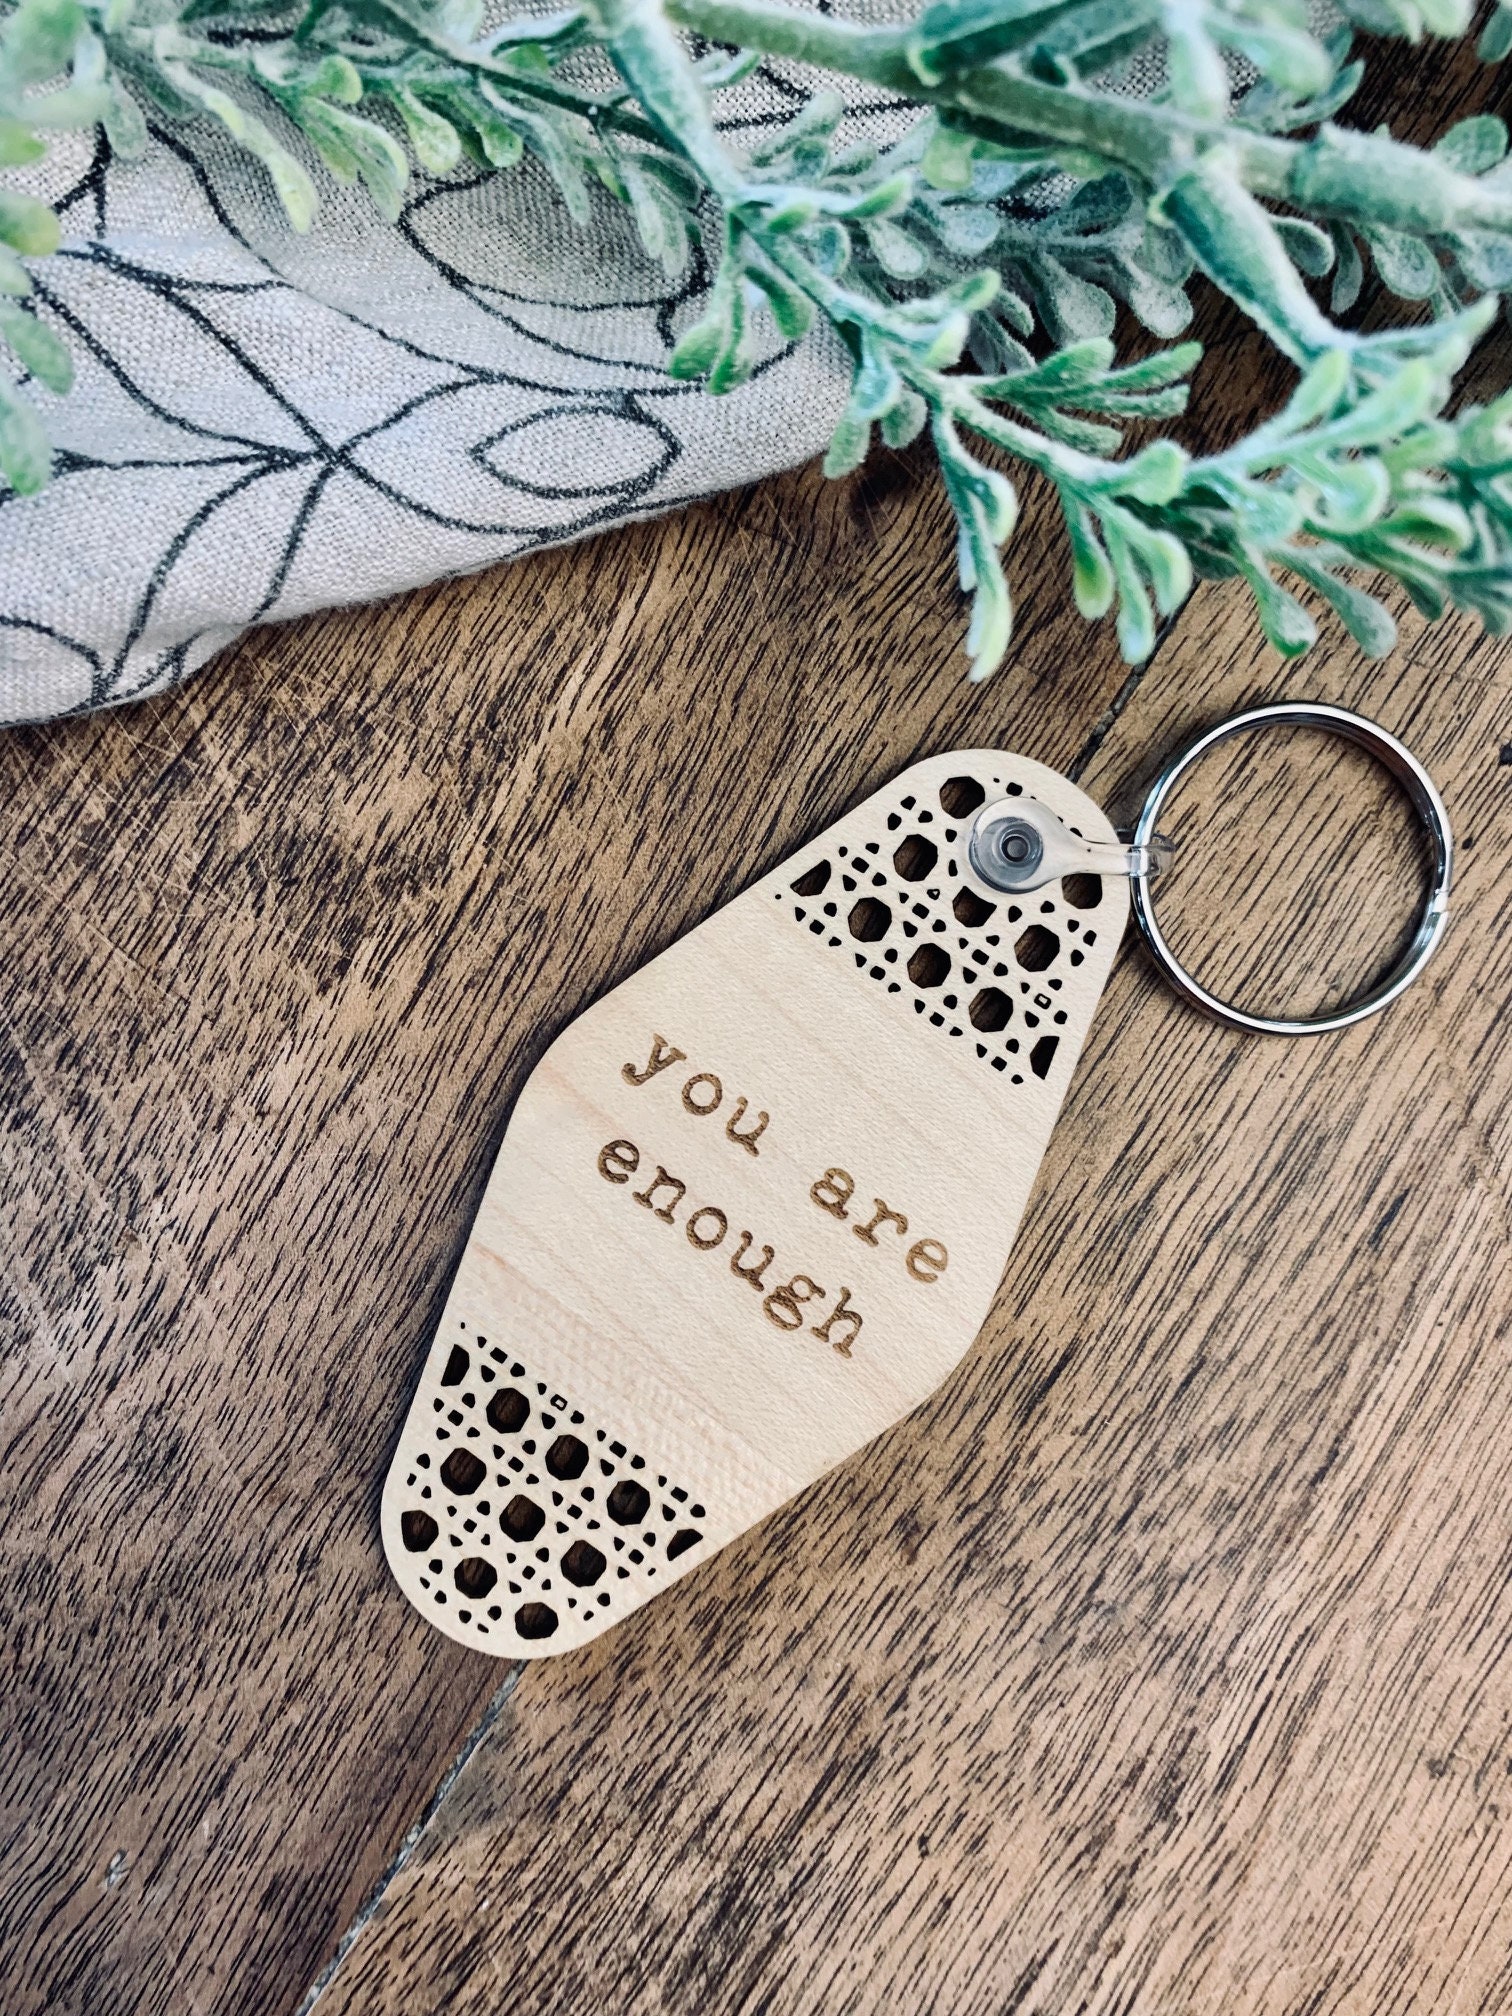 Inspirational Keychain, Motivational Keychain, Wood Keyring, Birthday Gift  for Her, Engraved Key Ring, Personalized Key Fob, Self Love 